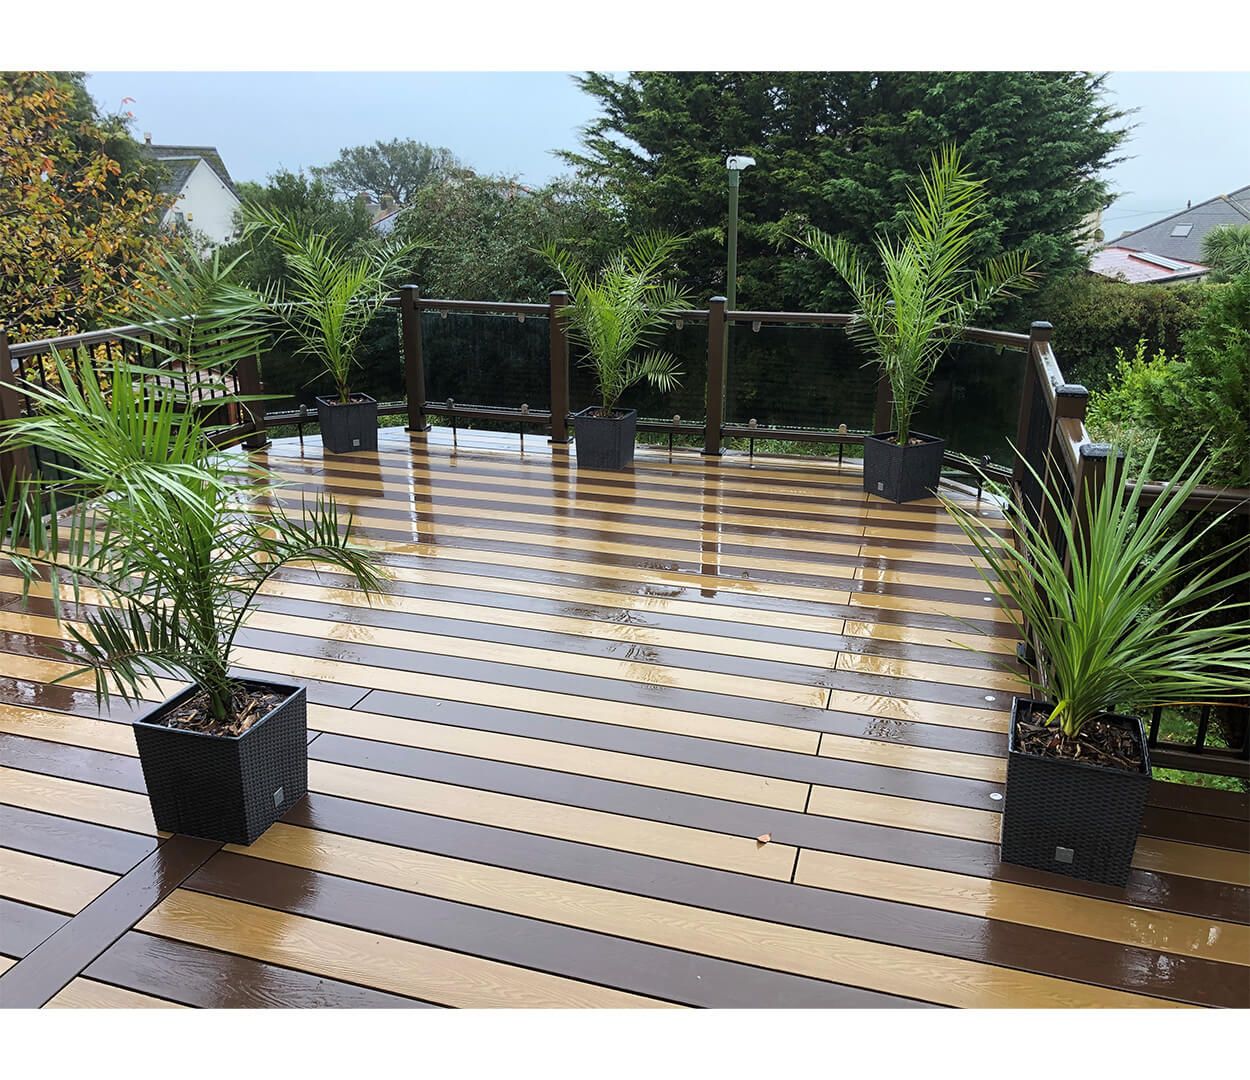 Cladco Composite Woodgrain Decking Boards in Teak and Coffee have created this strikingly unique decking design 